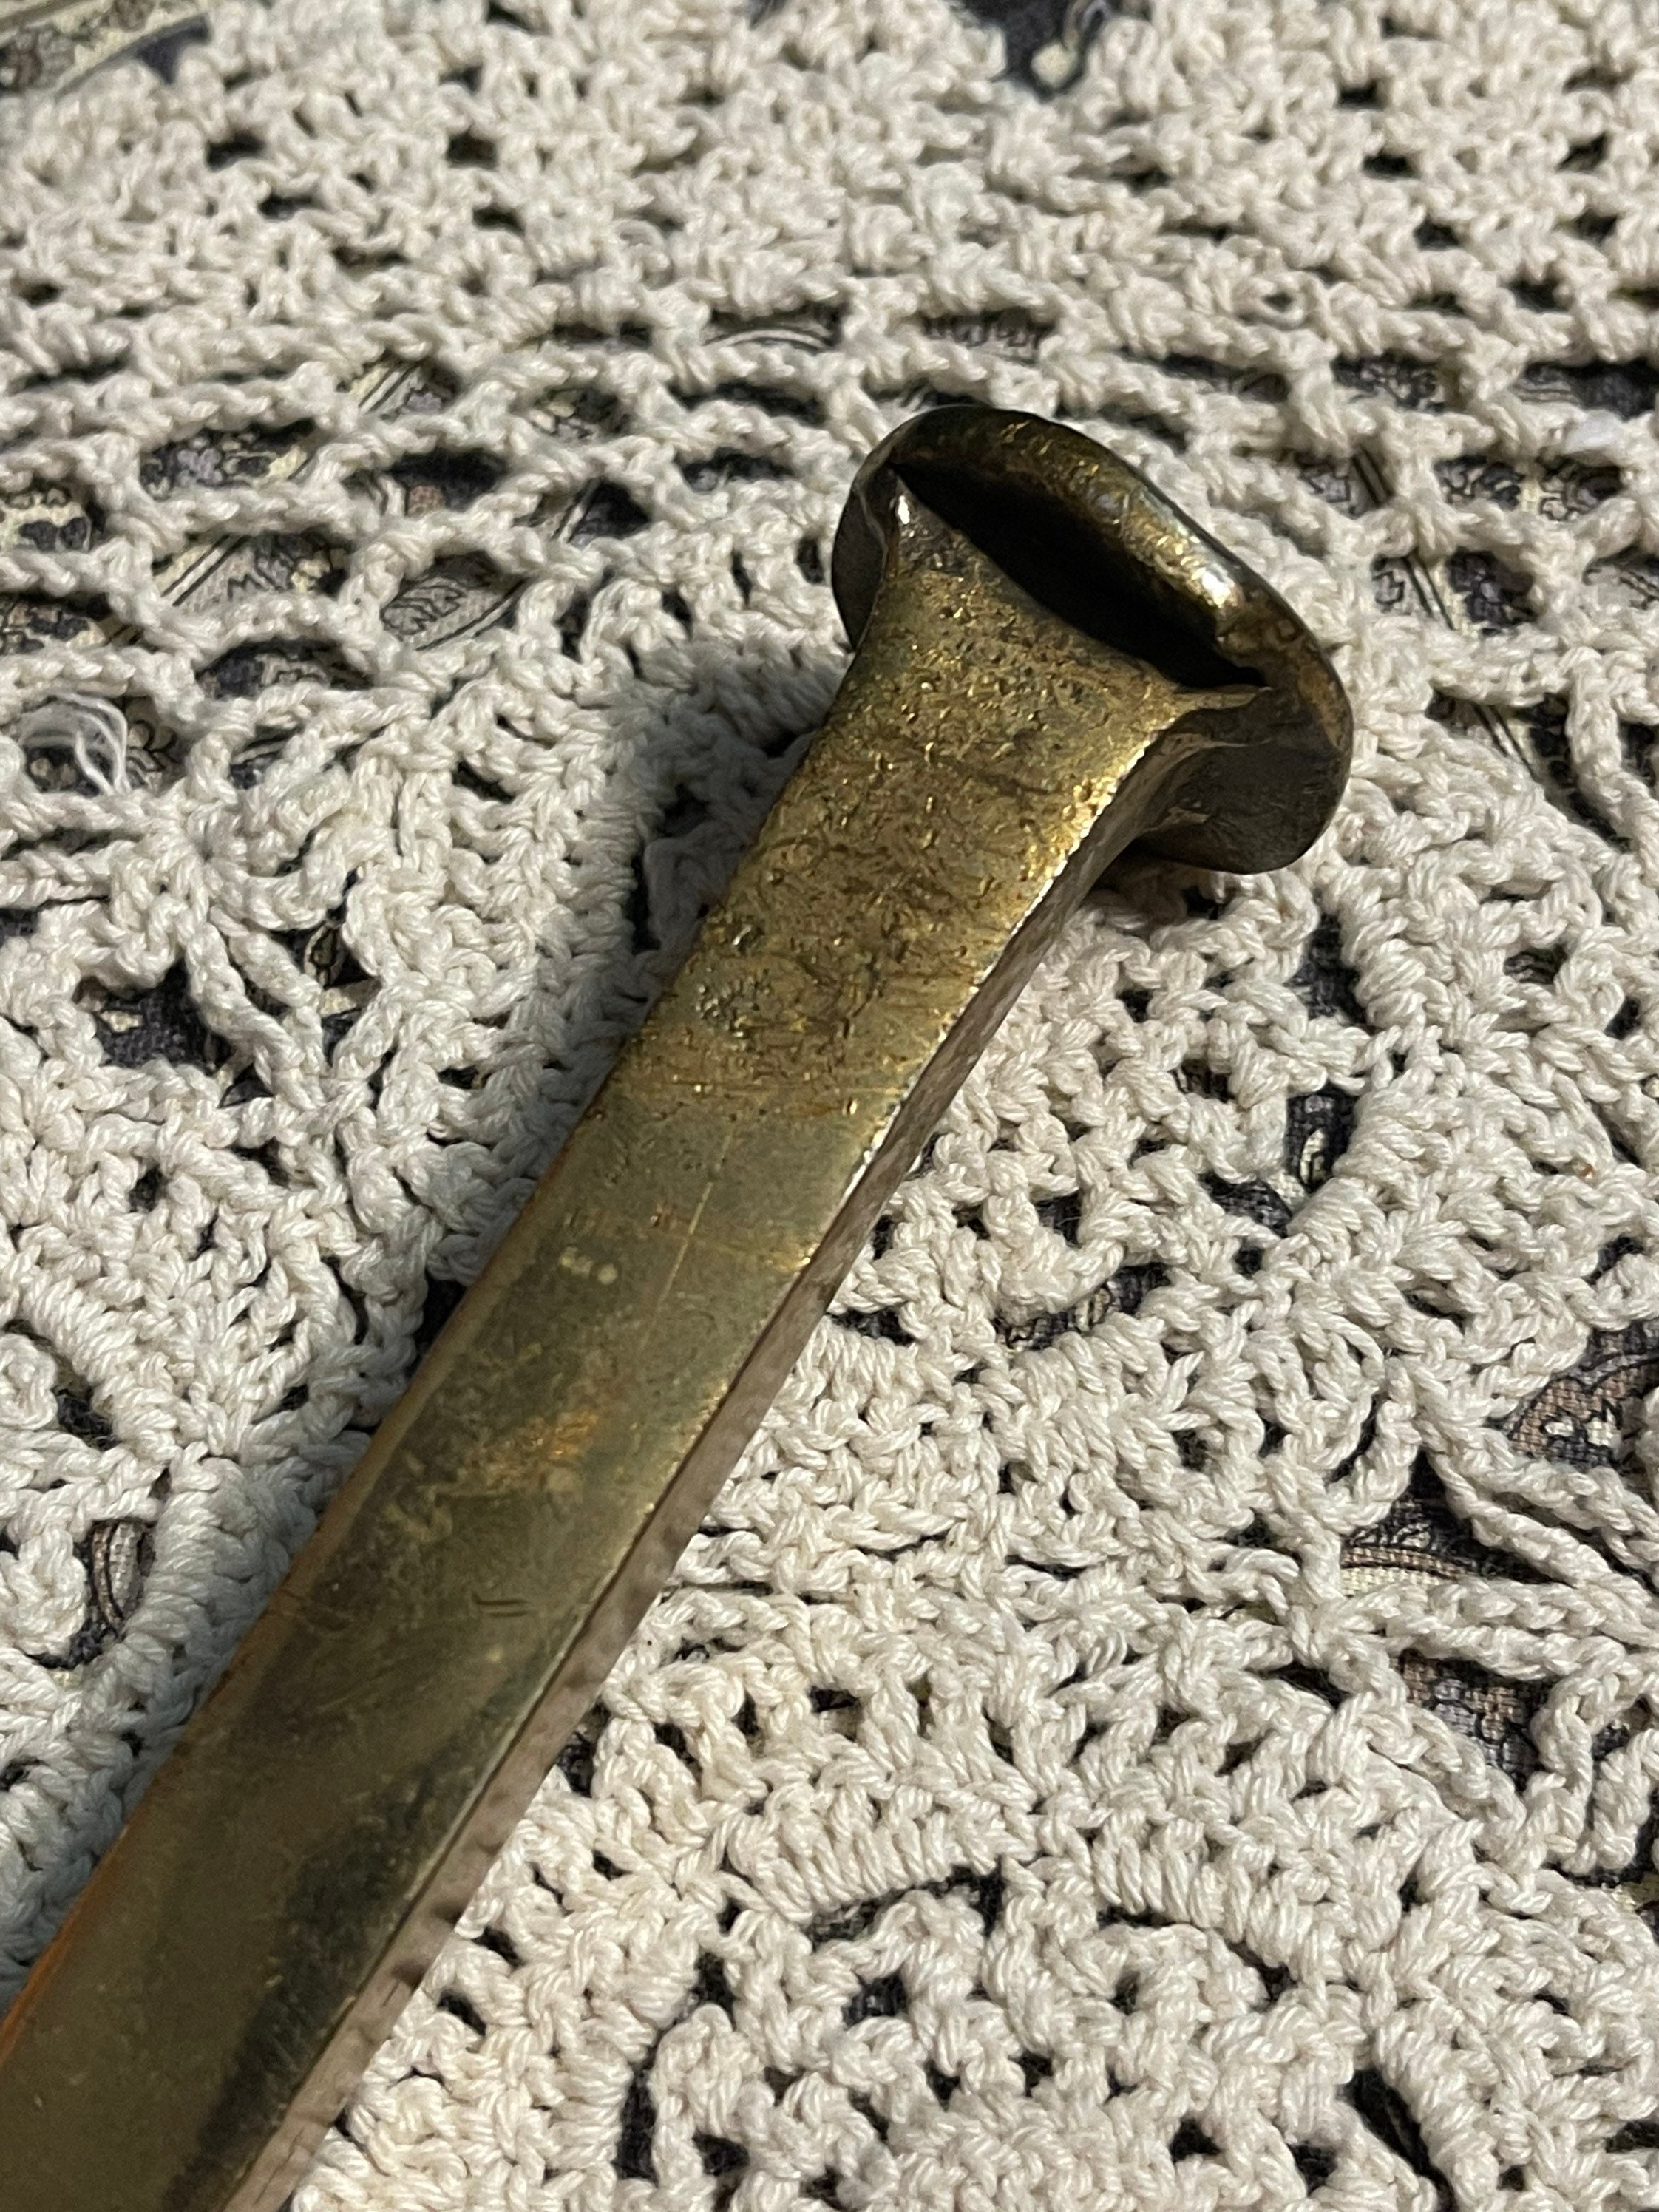 Vintage Brass Plated Railroad Spike Paperweight -  Finland